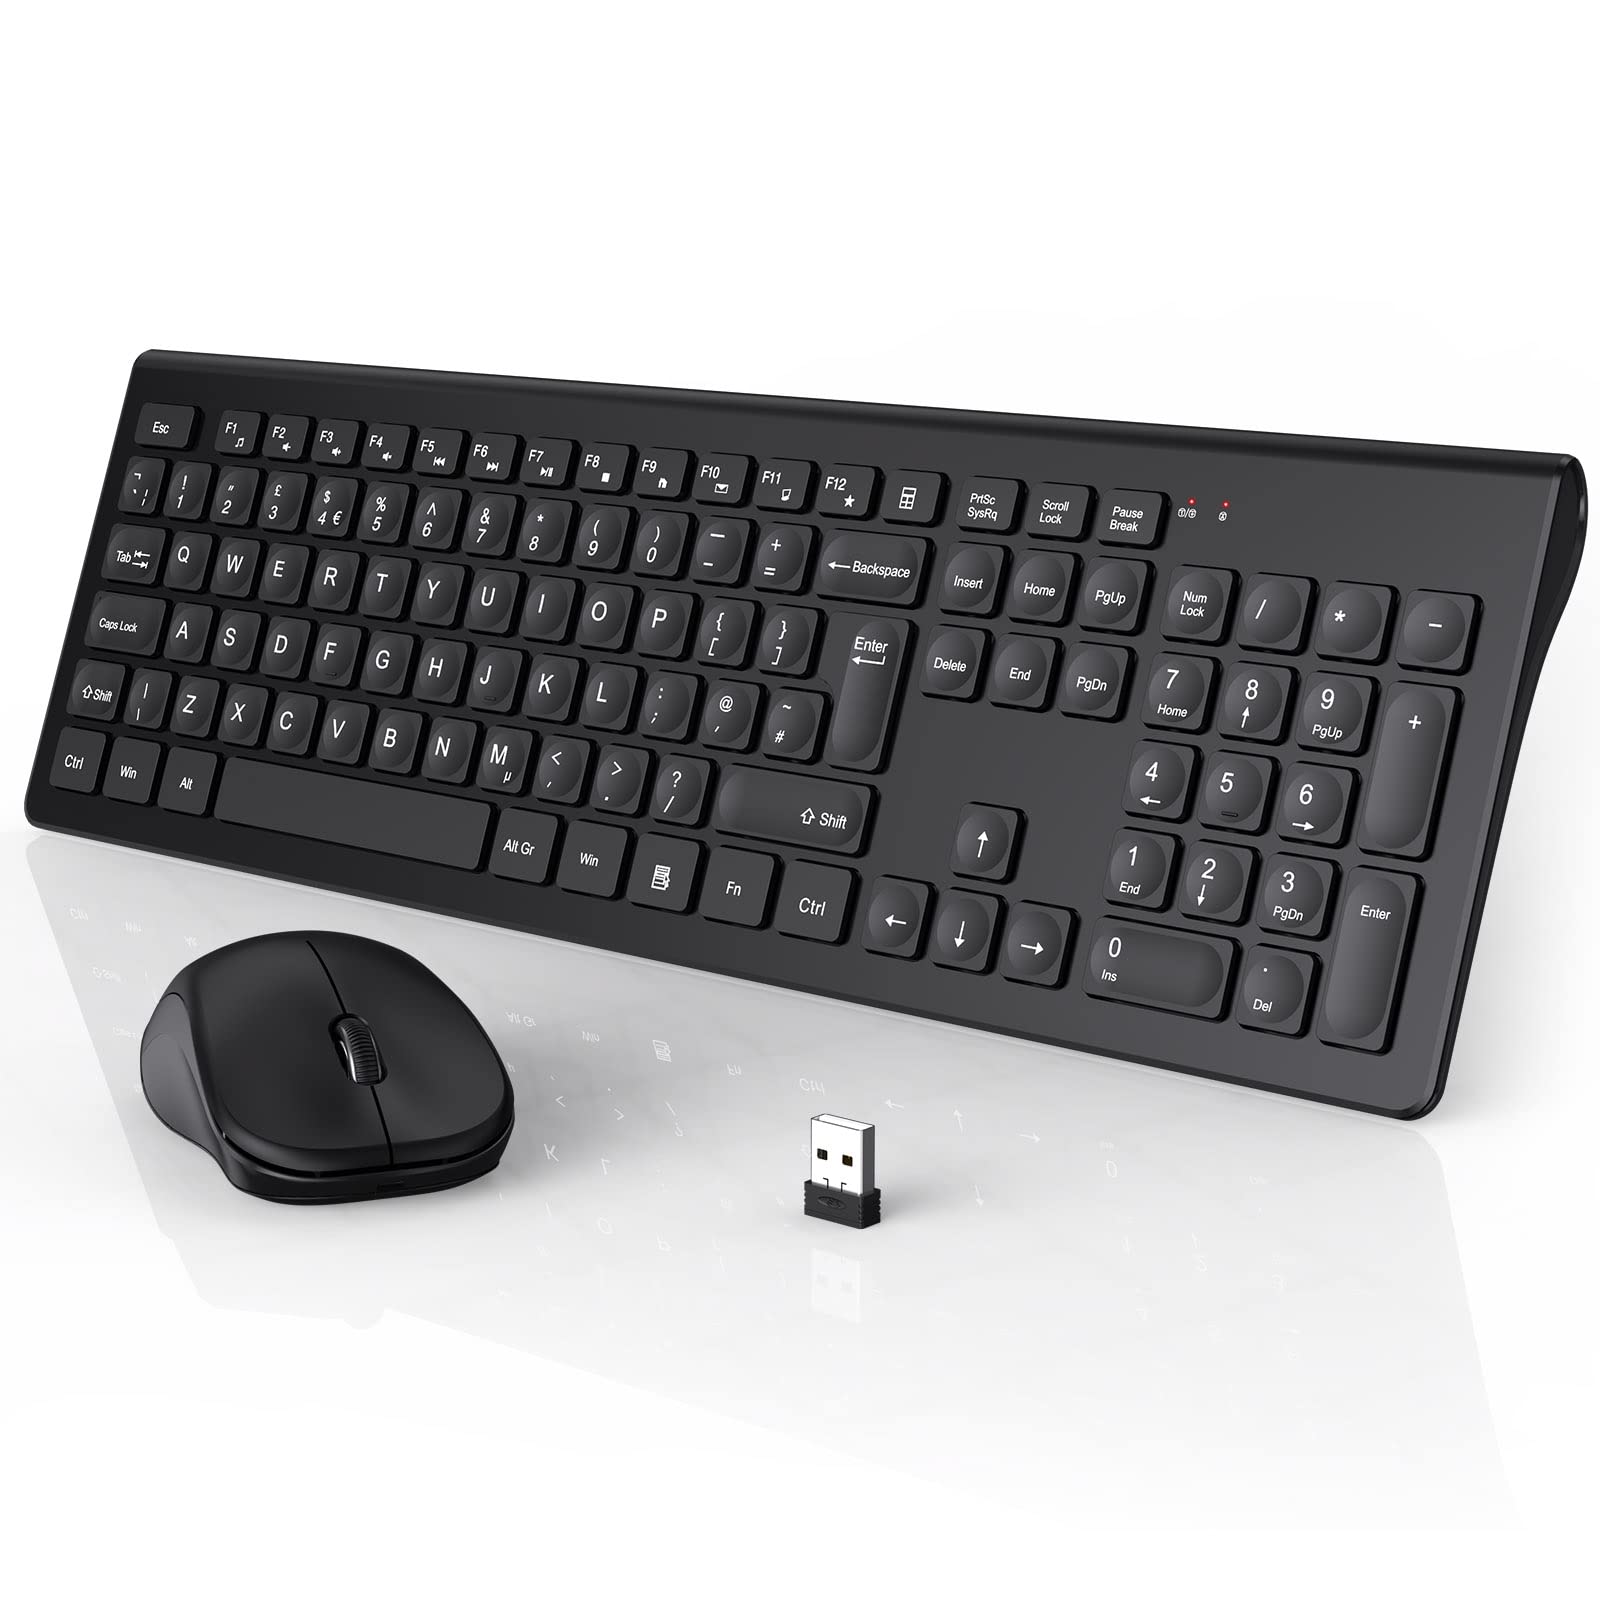 Wireless Keyboard and Mouse Set UK, Energy Saving, 2,4 GHz Ergonomic Full Size Keyboard with Micro Concave Keycaps, Silent Cordless Mouse, for Windows, Computer, PC, Laptop, Home Office - Black